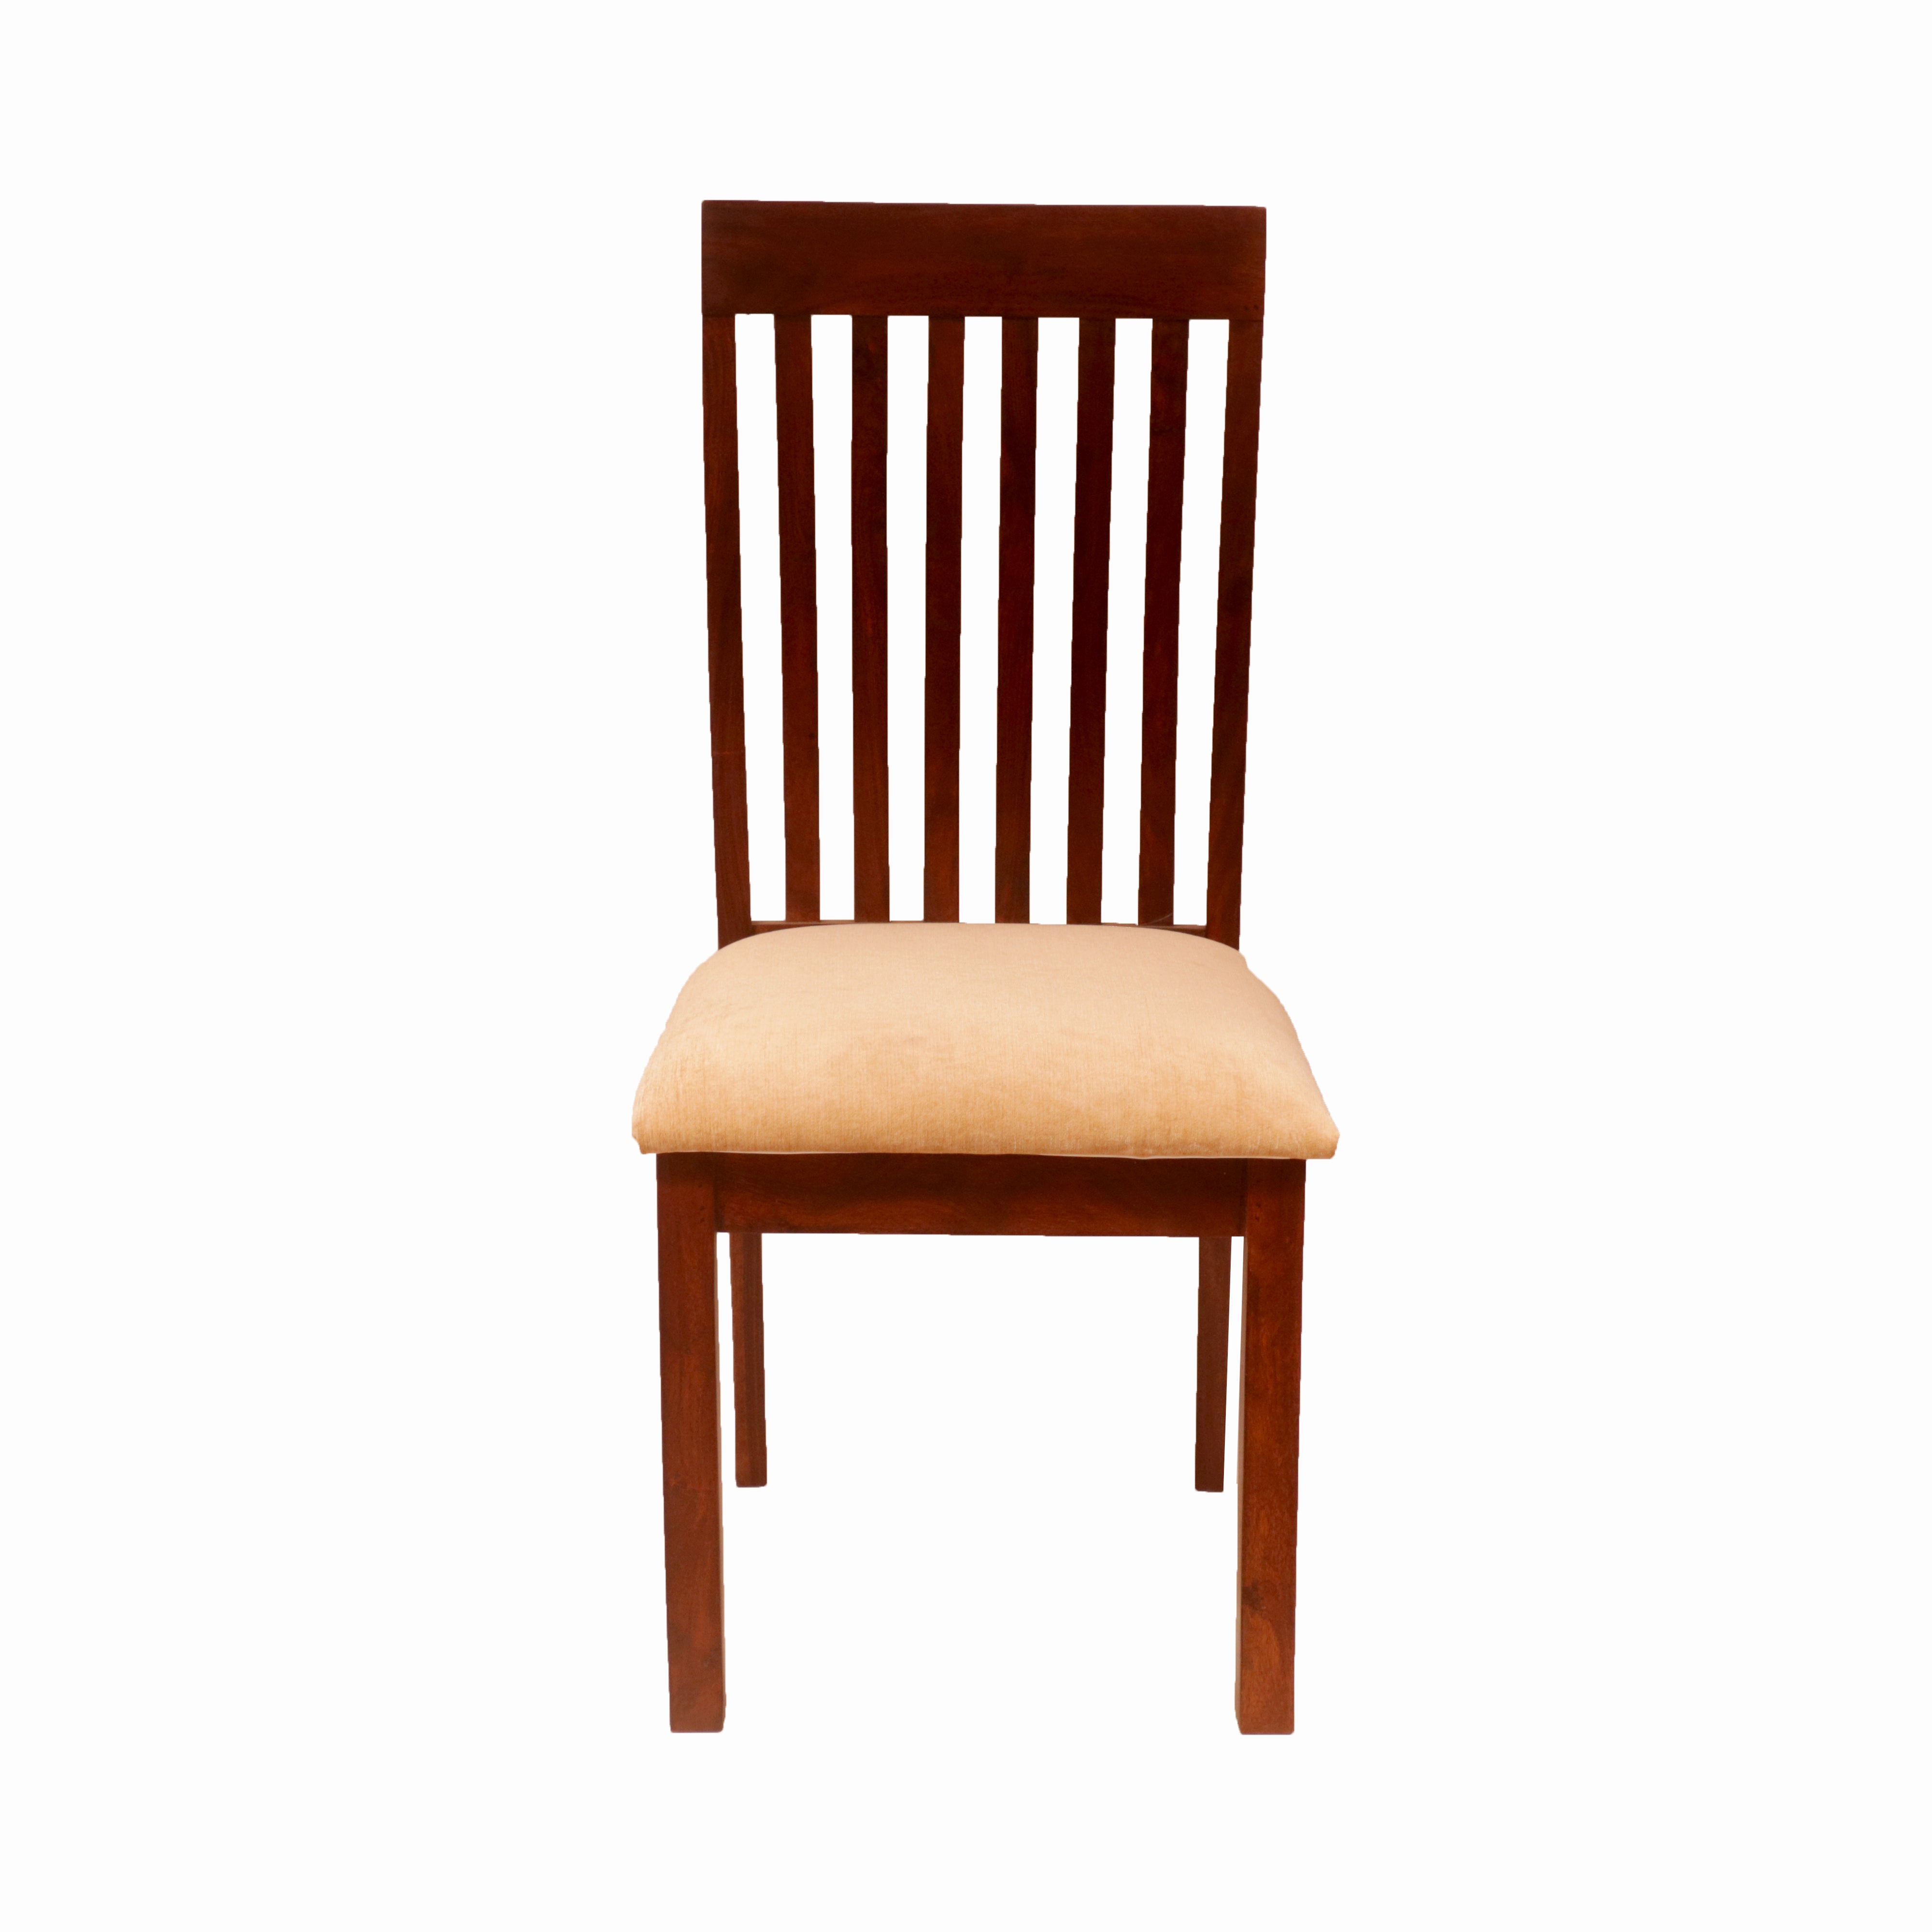 (Set of 2) Straight Striped Back Chair Dining Chair